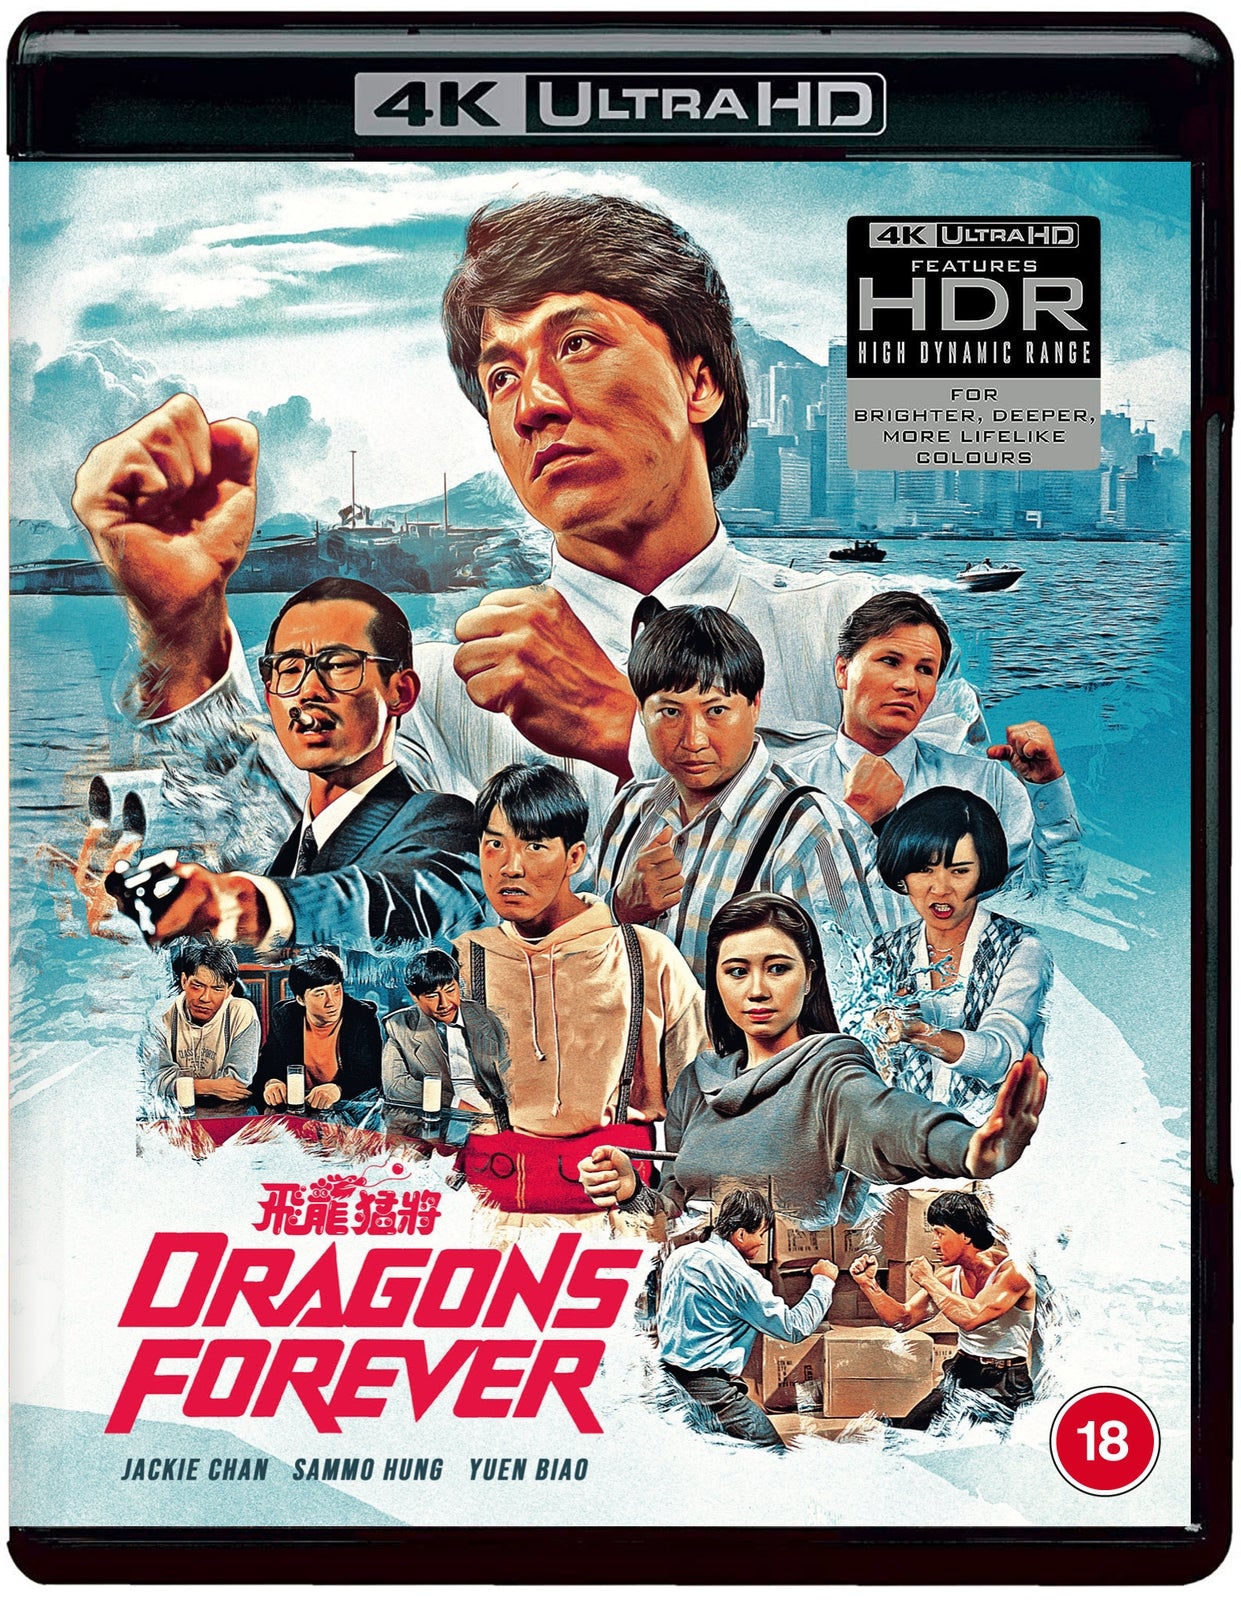 Dragons Forever 4K Ultra HD (Includes Blu-ray)